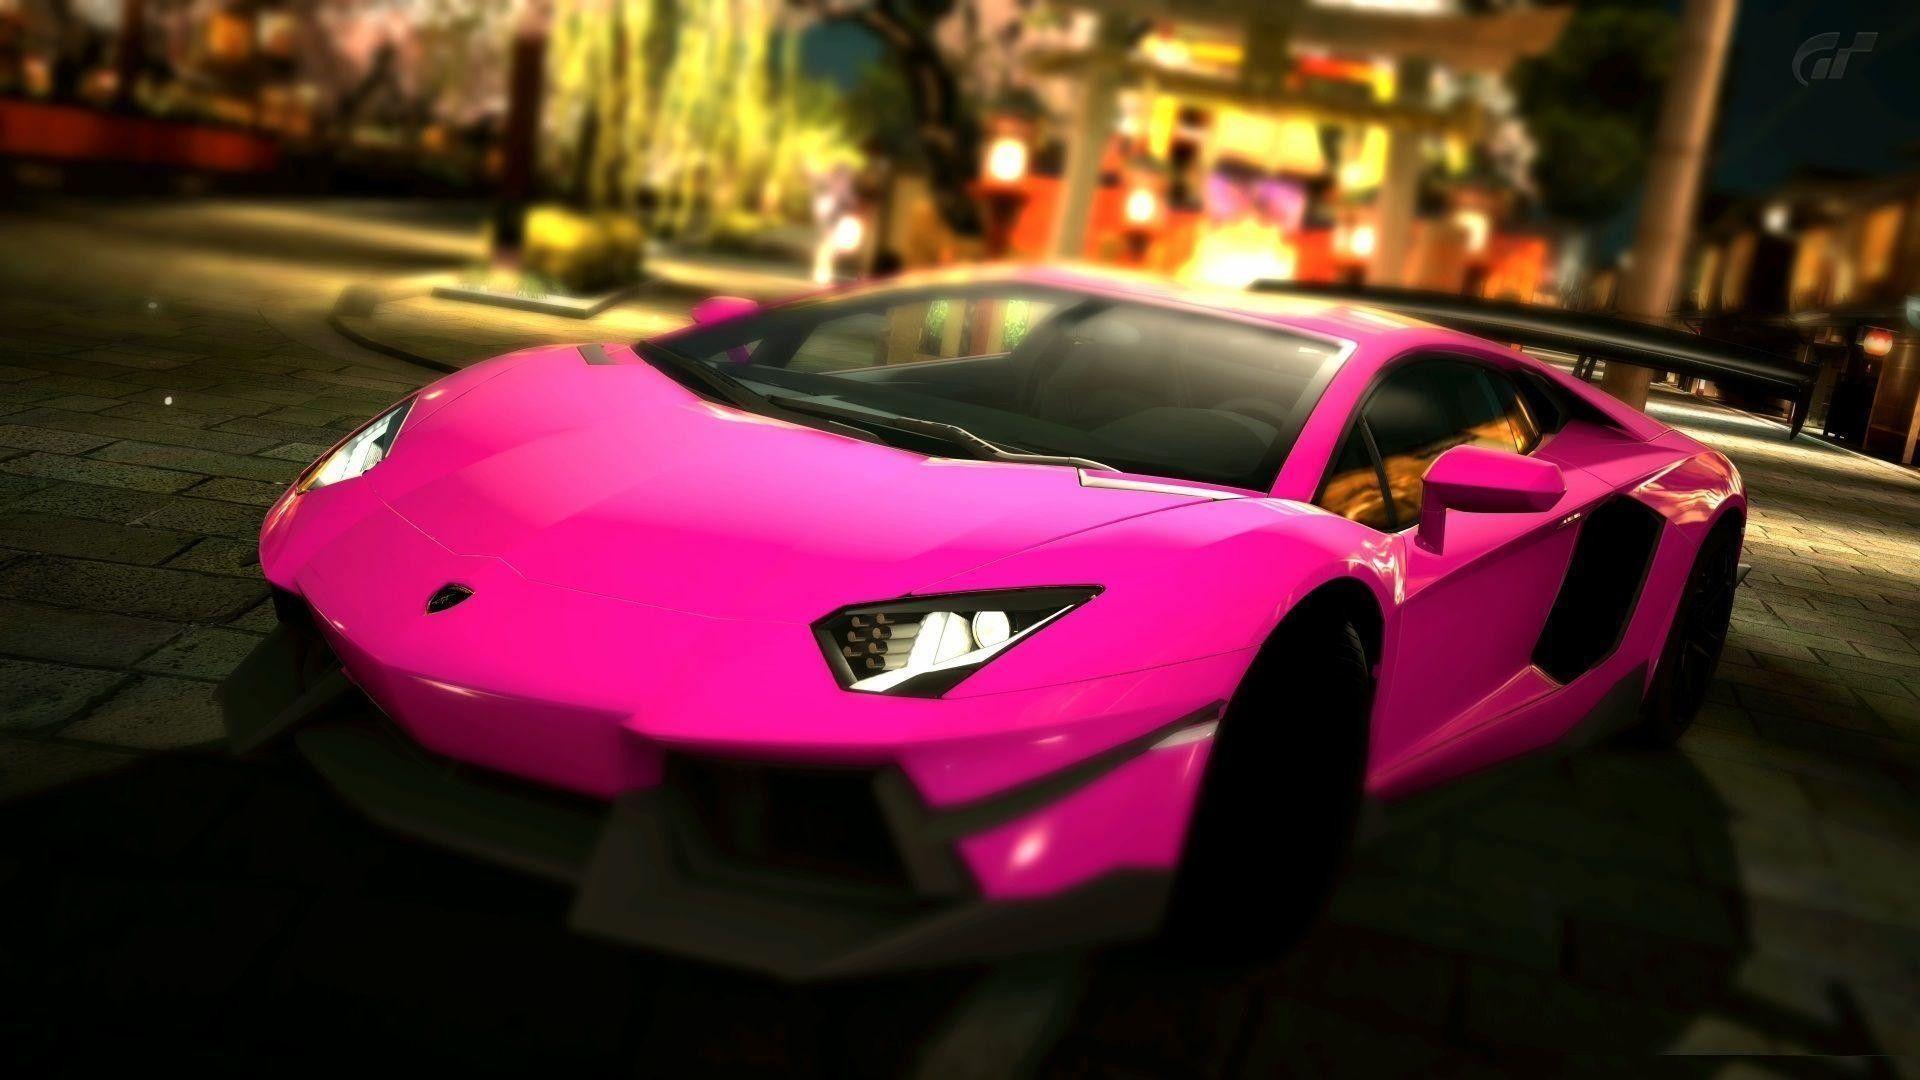 Pink Car Photos Download The BEST Free Pink Car Stock Photos  HD Images